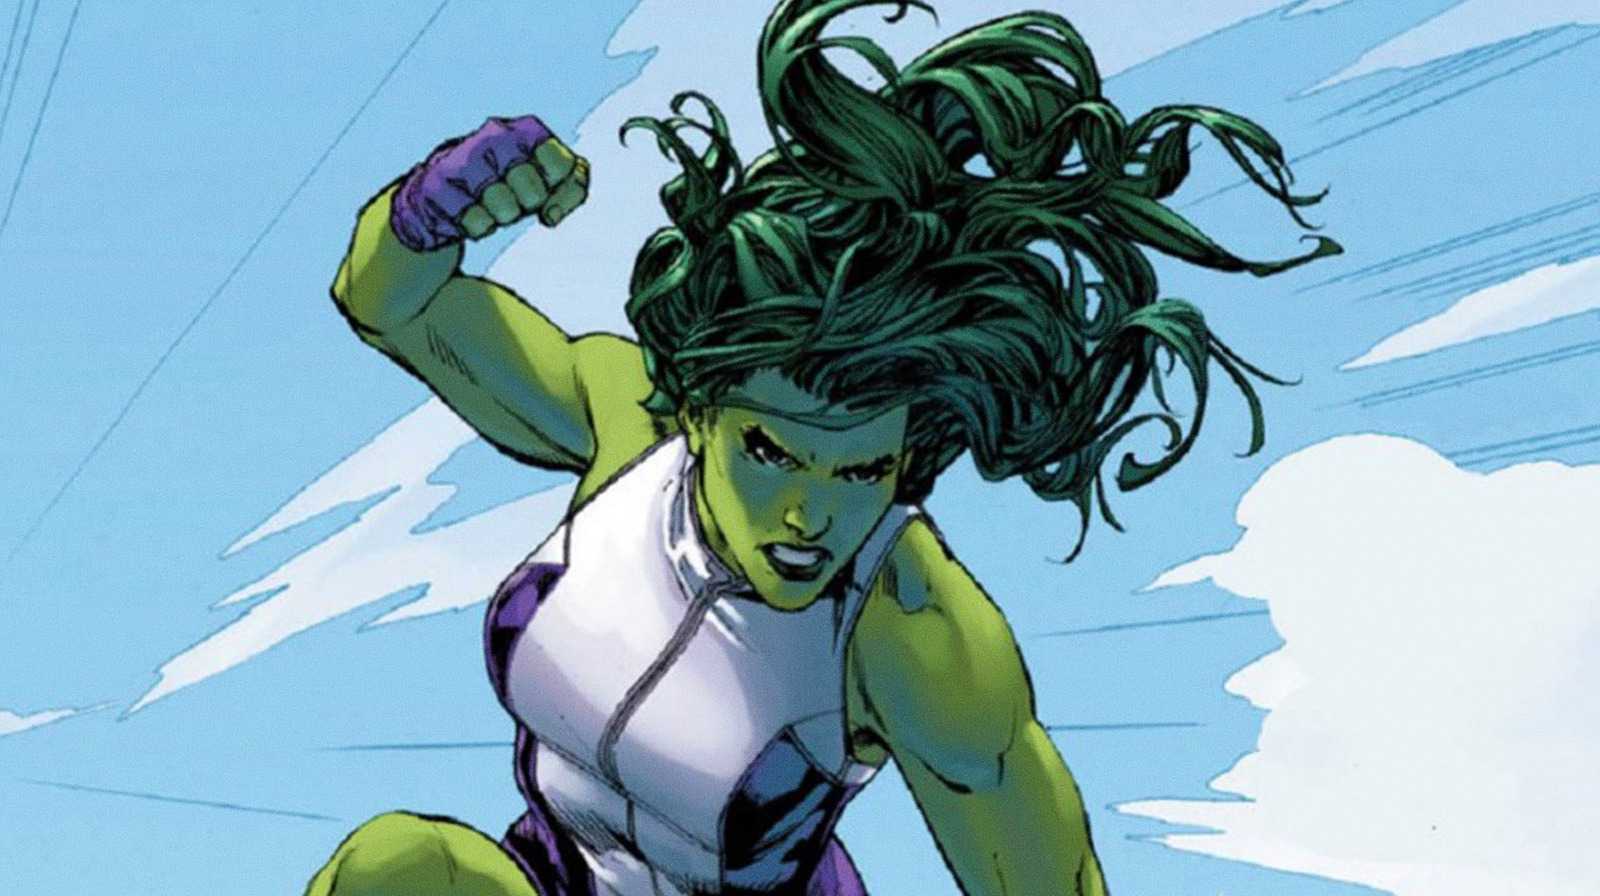 She Hulk: Attorney at Law  -  New promo art highlights the MCU's newest superhero hero fully suited up for action